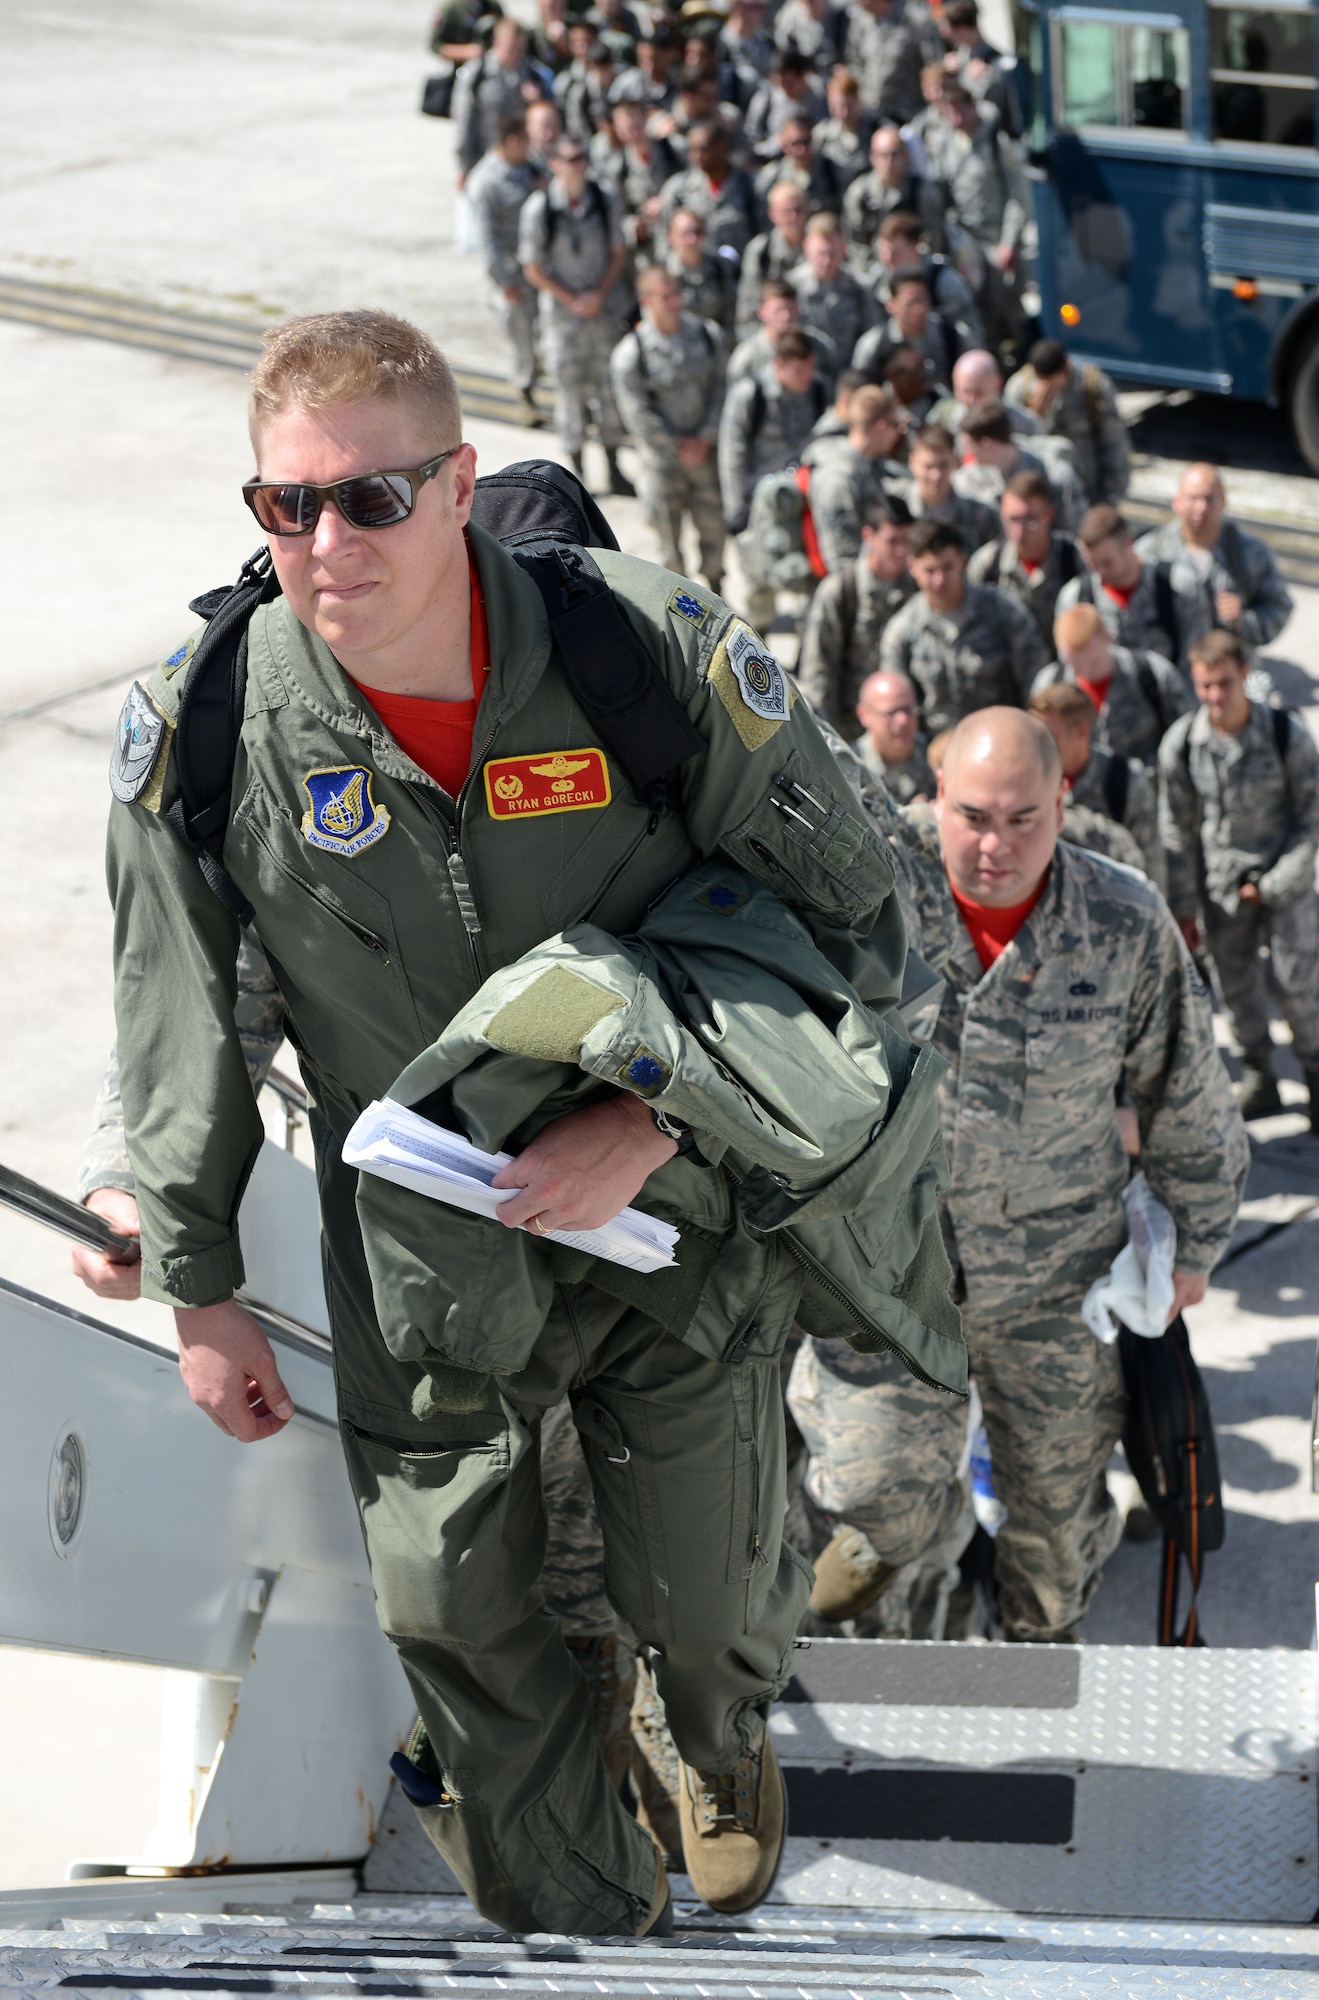 Airmen from Minot Air Force Base, N.D., prepare to leave Andersen Air Force Base, Guam, on March 4, 2016. CBP missions began March 2004 and are designed to enhance regional security and provide reassurance to allies and partners that the United States is capable to defend its national security interests in the Indo-Asia-Pacific region. (U.S. Air Force photo/Airman 1st Class Arielle Vasquez)